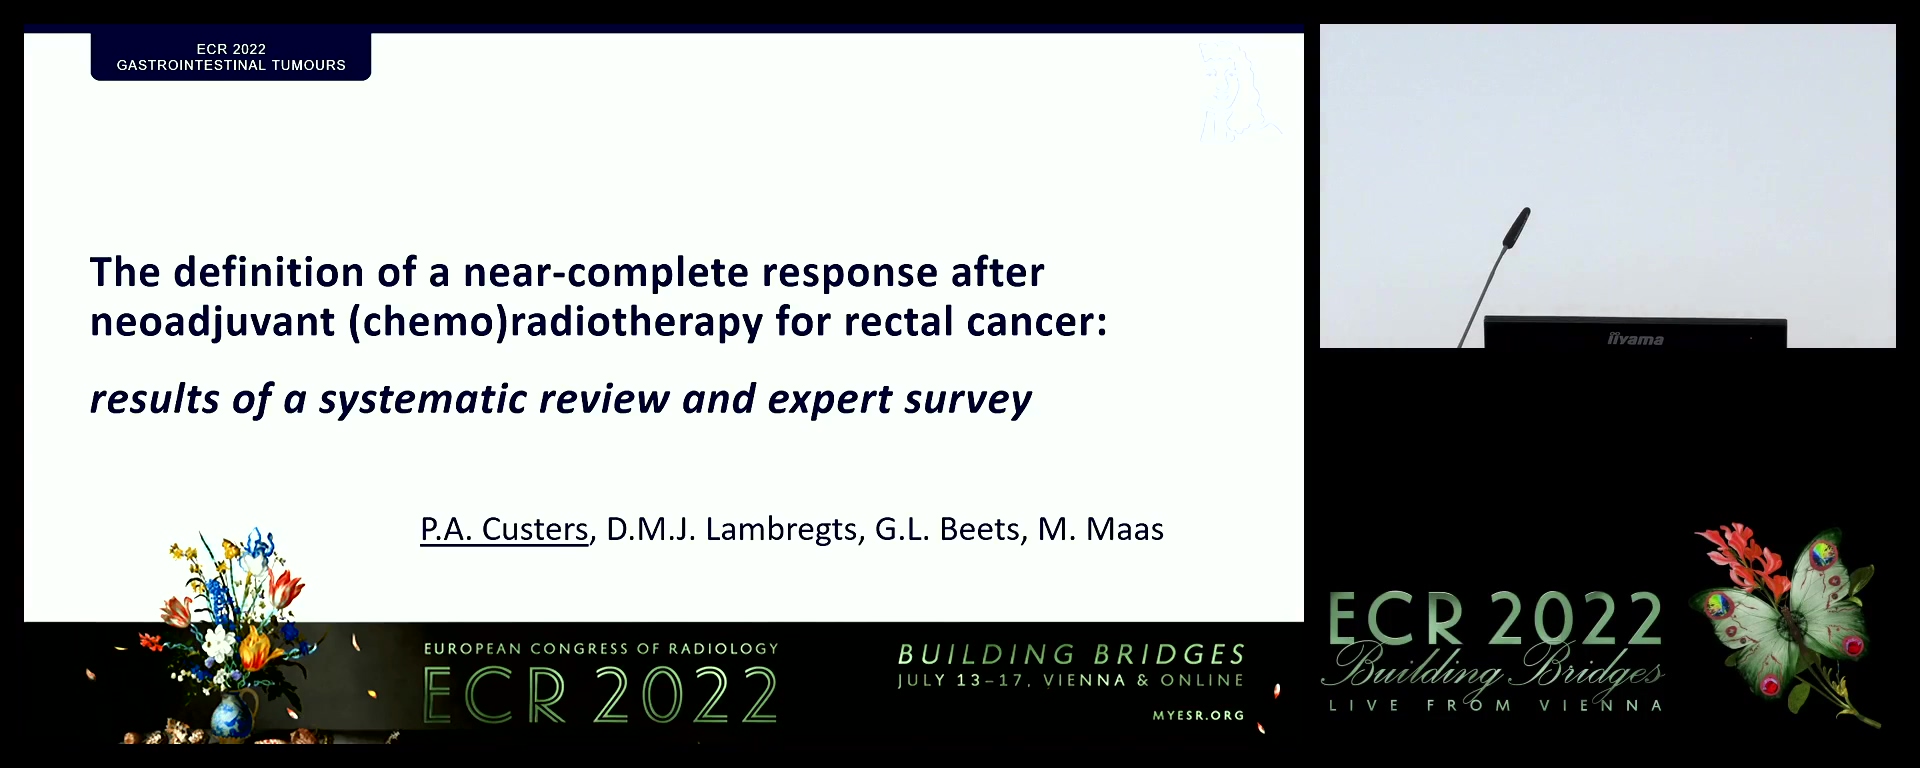 The definition of a near-complete response after neoadjuvant (chemo)radiotherapy for rectal cancer: results of an expert survey - Petra Custers, Amsterdam / NL